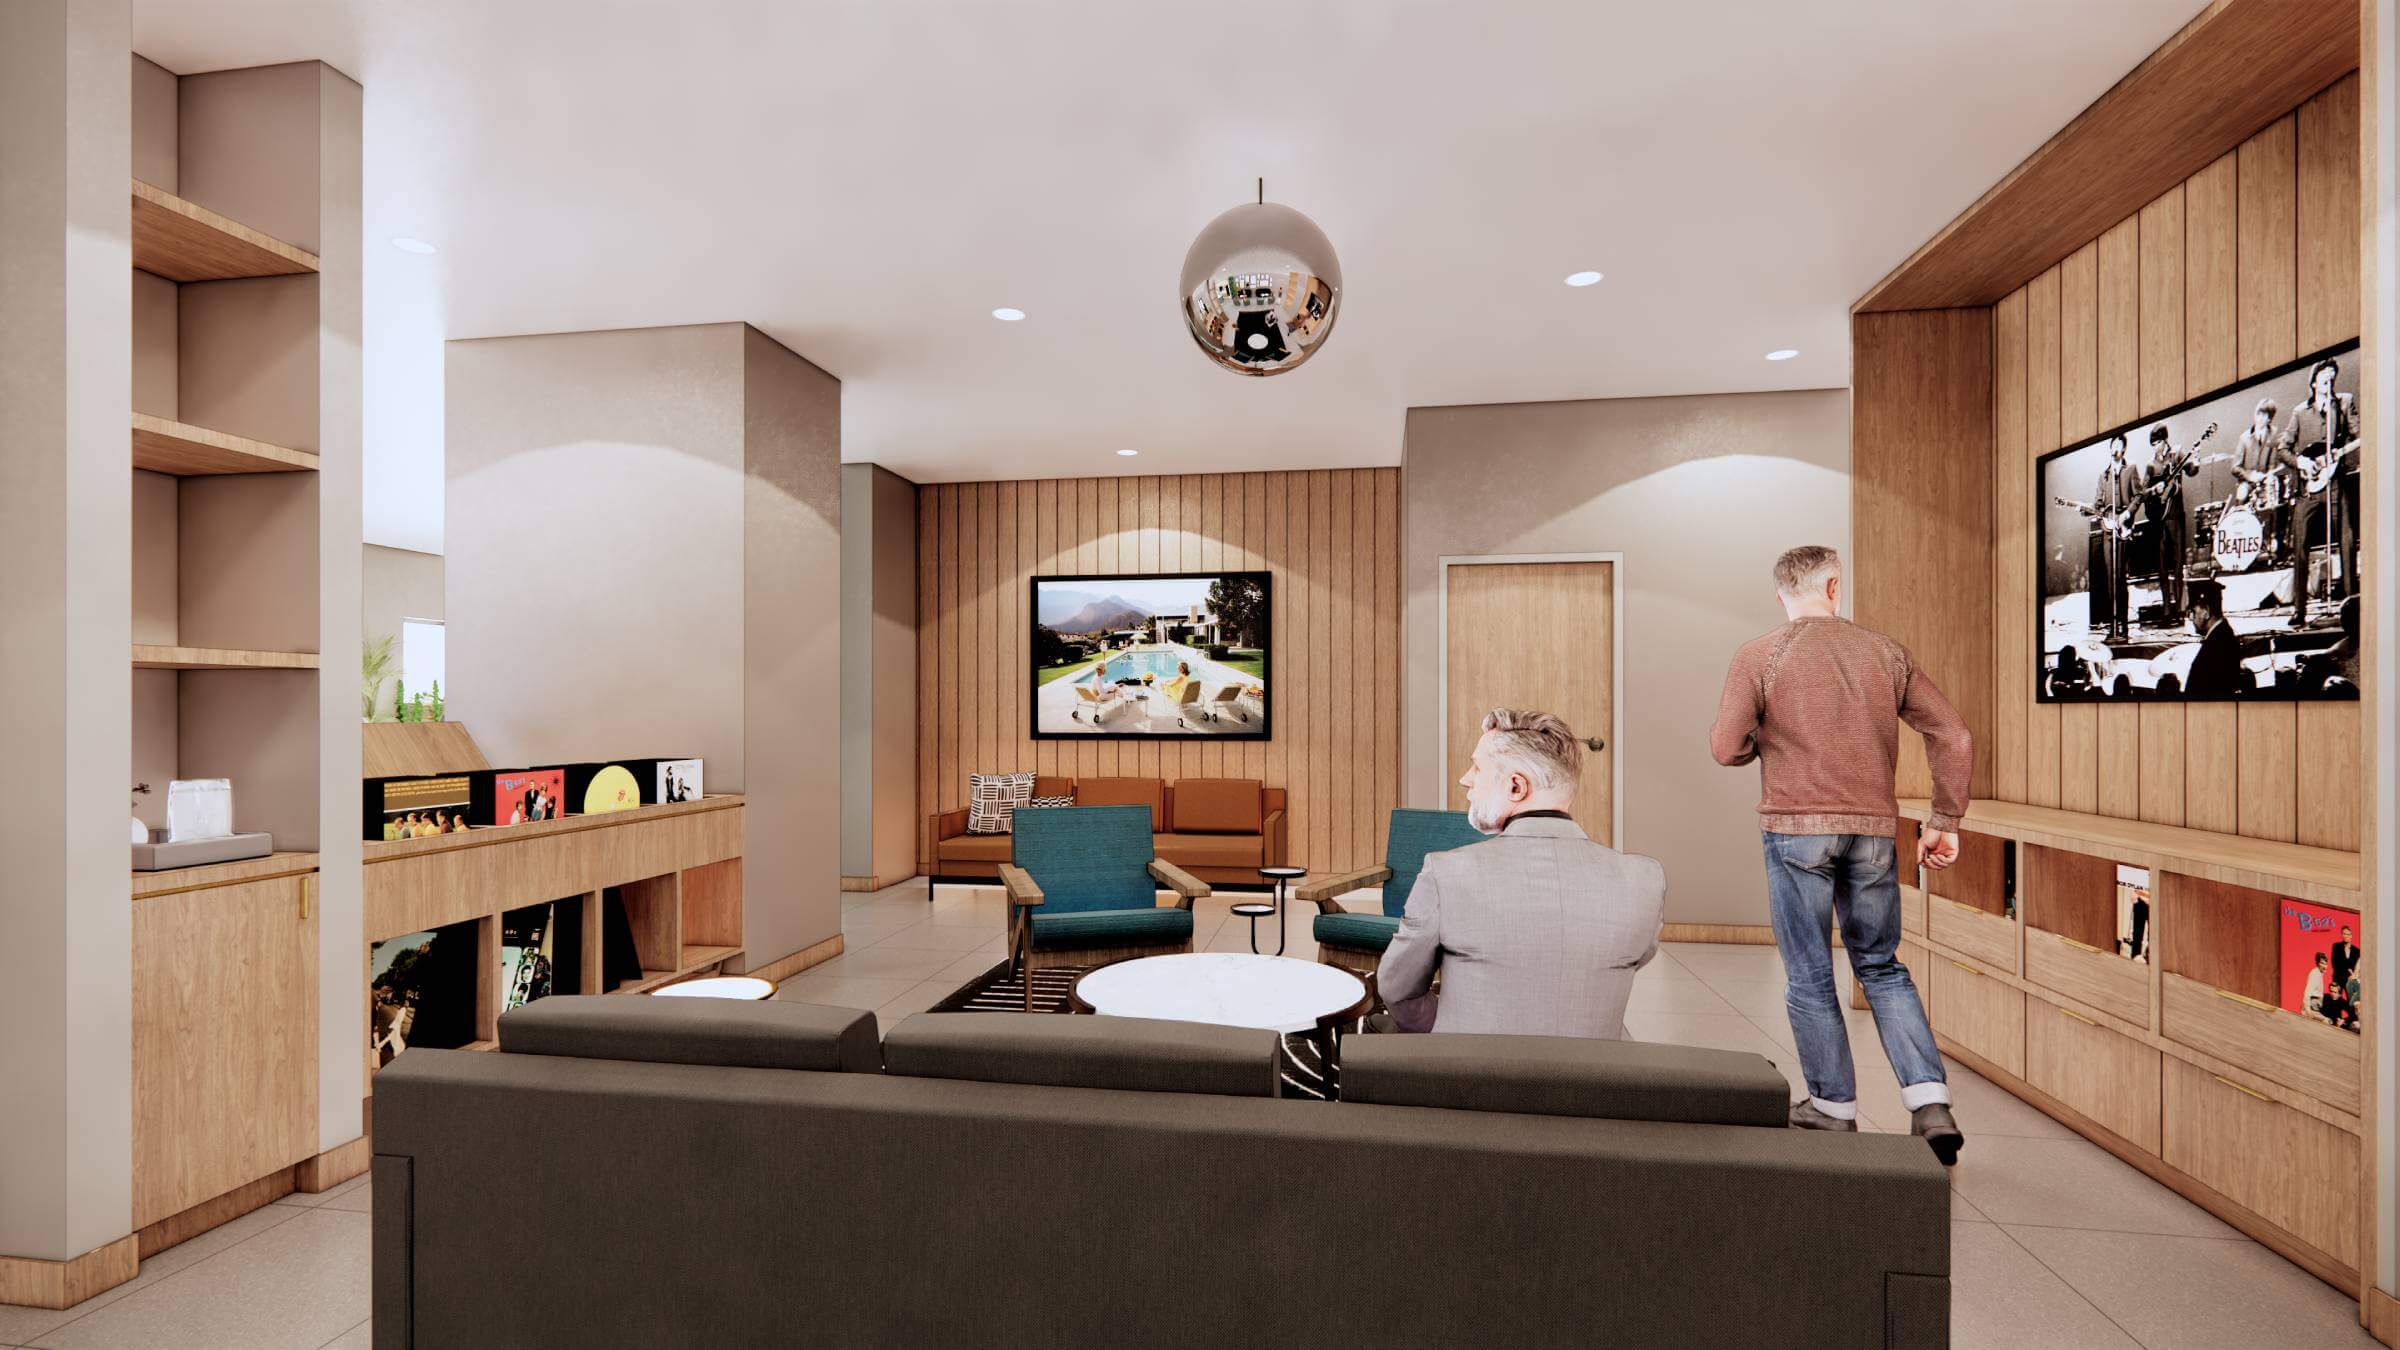 Groove Lofts at Northstar Center apartment Party Room rendering with a couch, chairs, coffee table, TV, and a couple of people lounging and watching TV